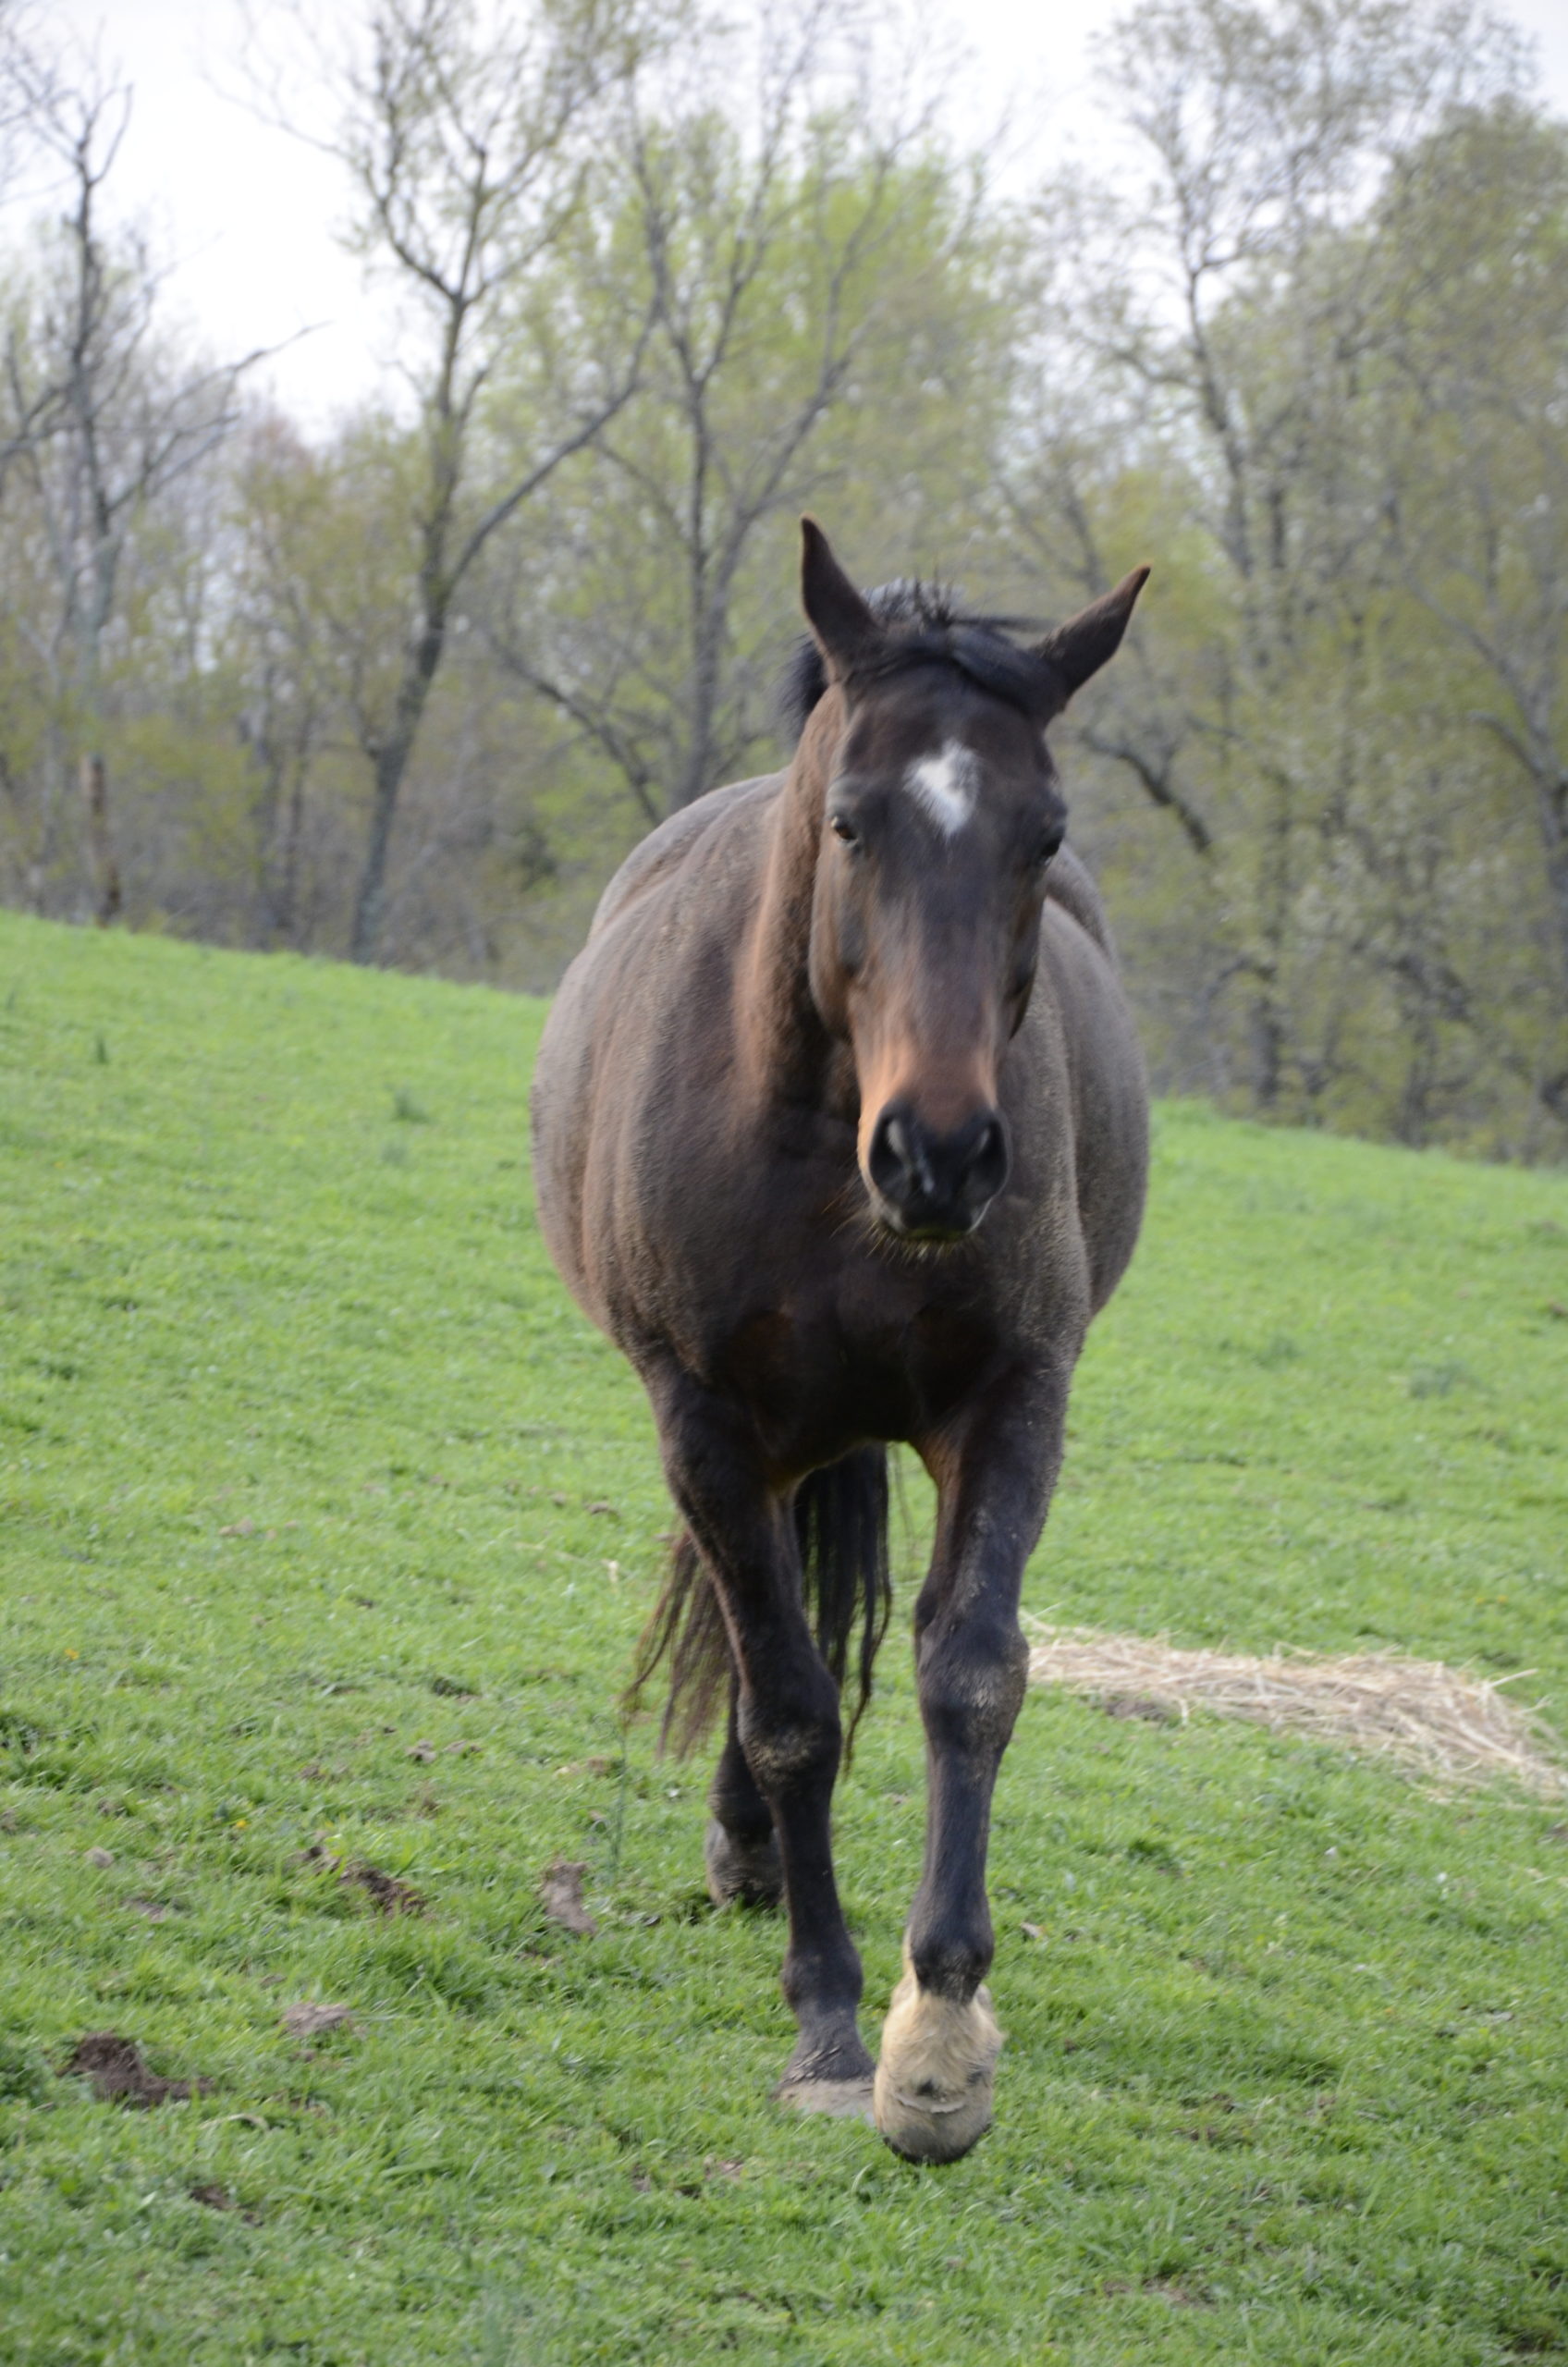 Prevent Lameness, Keep Your Horse Sound